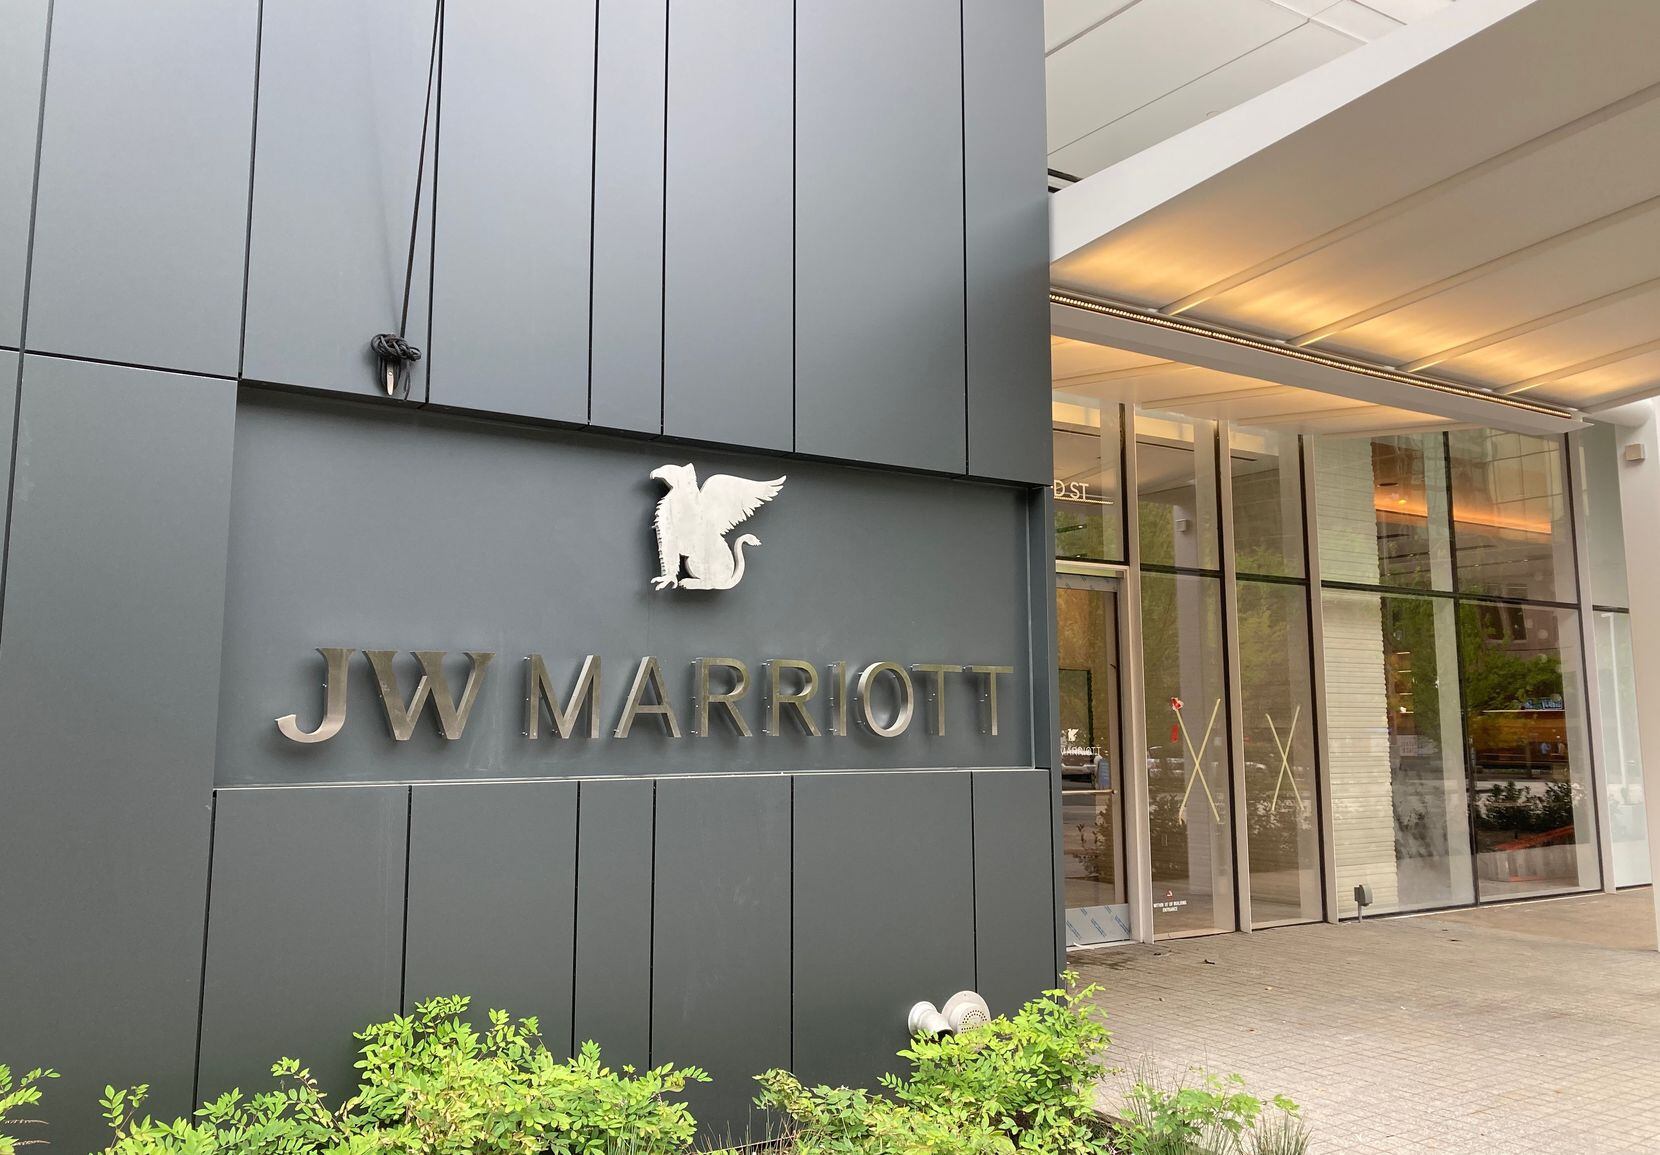 The entry to downtown Dallas' new JW Marriott Hotel which opens in June.